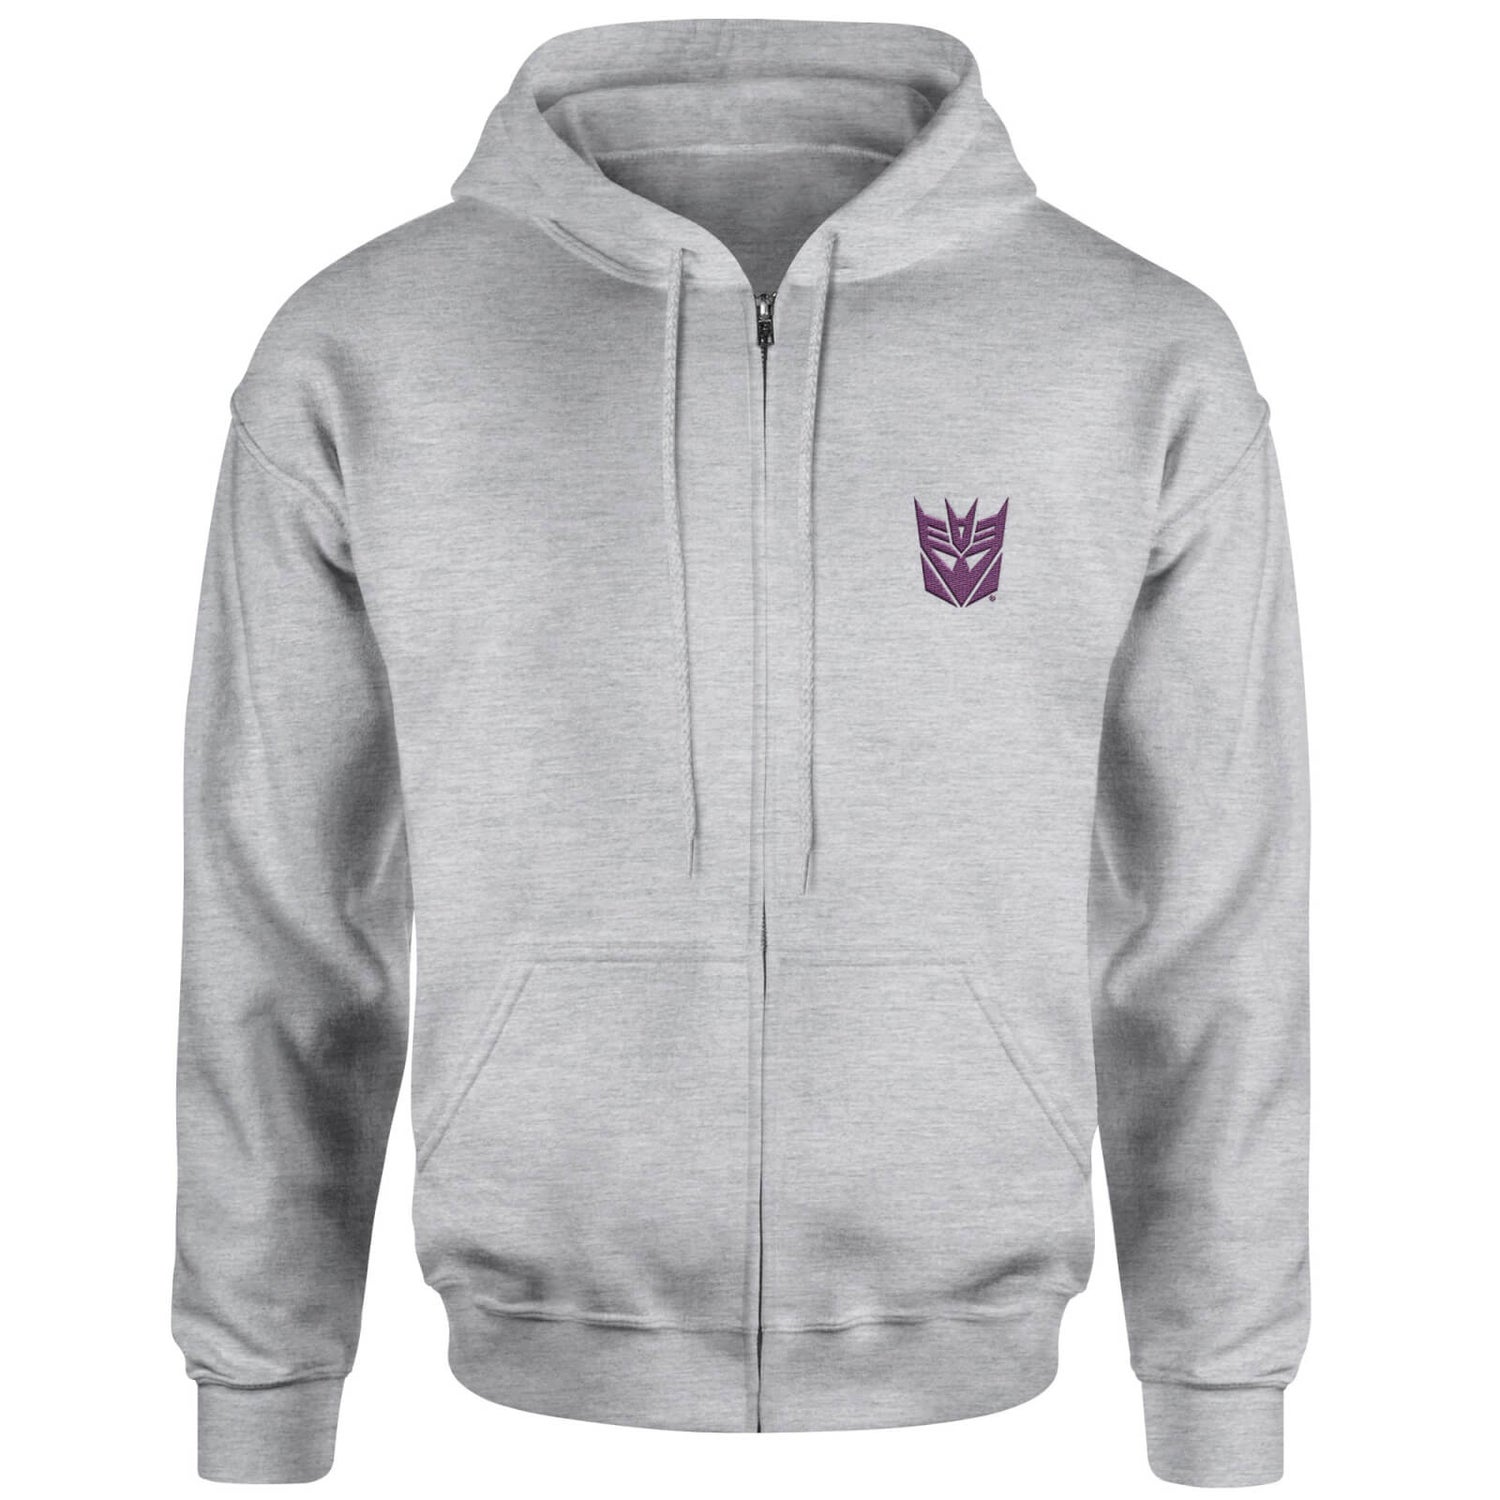 Transformers Decepticon Embroidered Unisex Zipped Hoodie - Grey